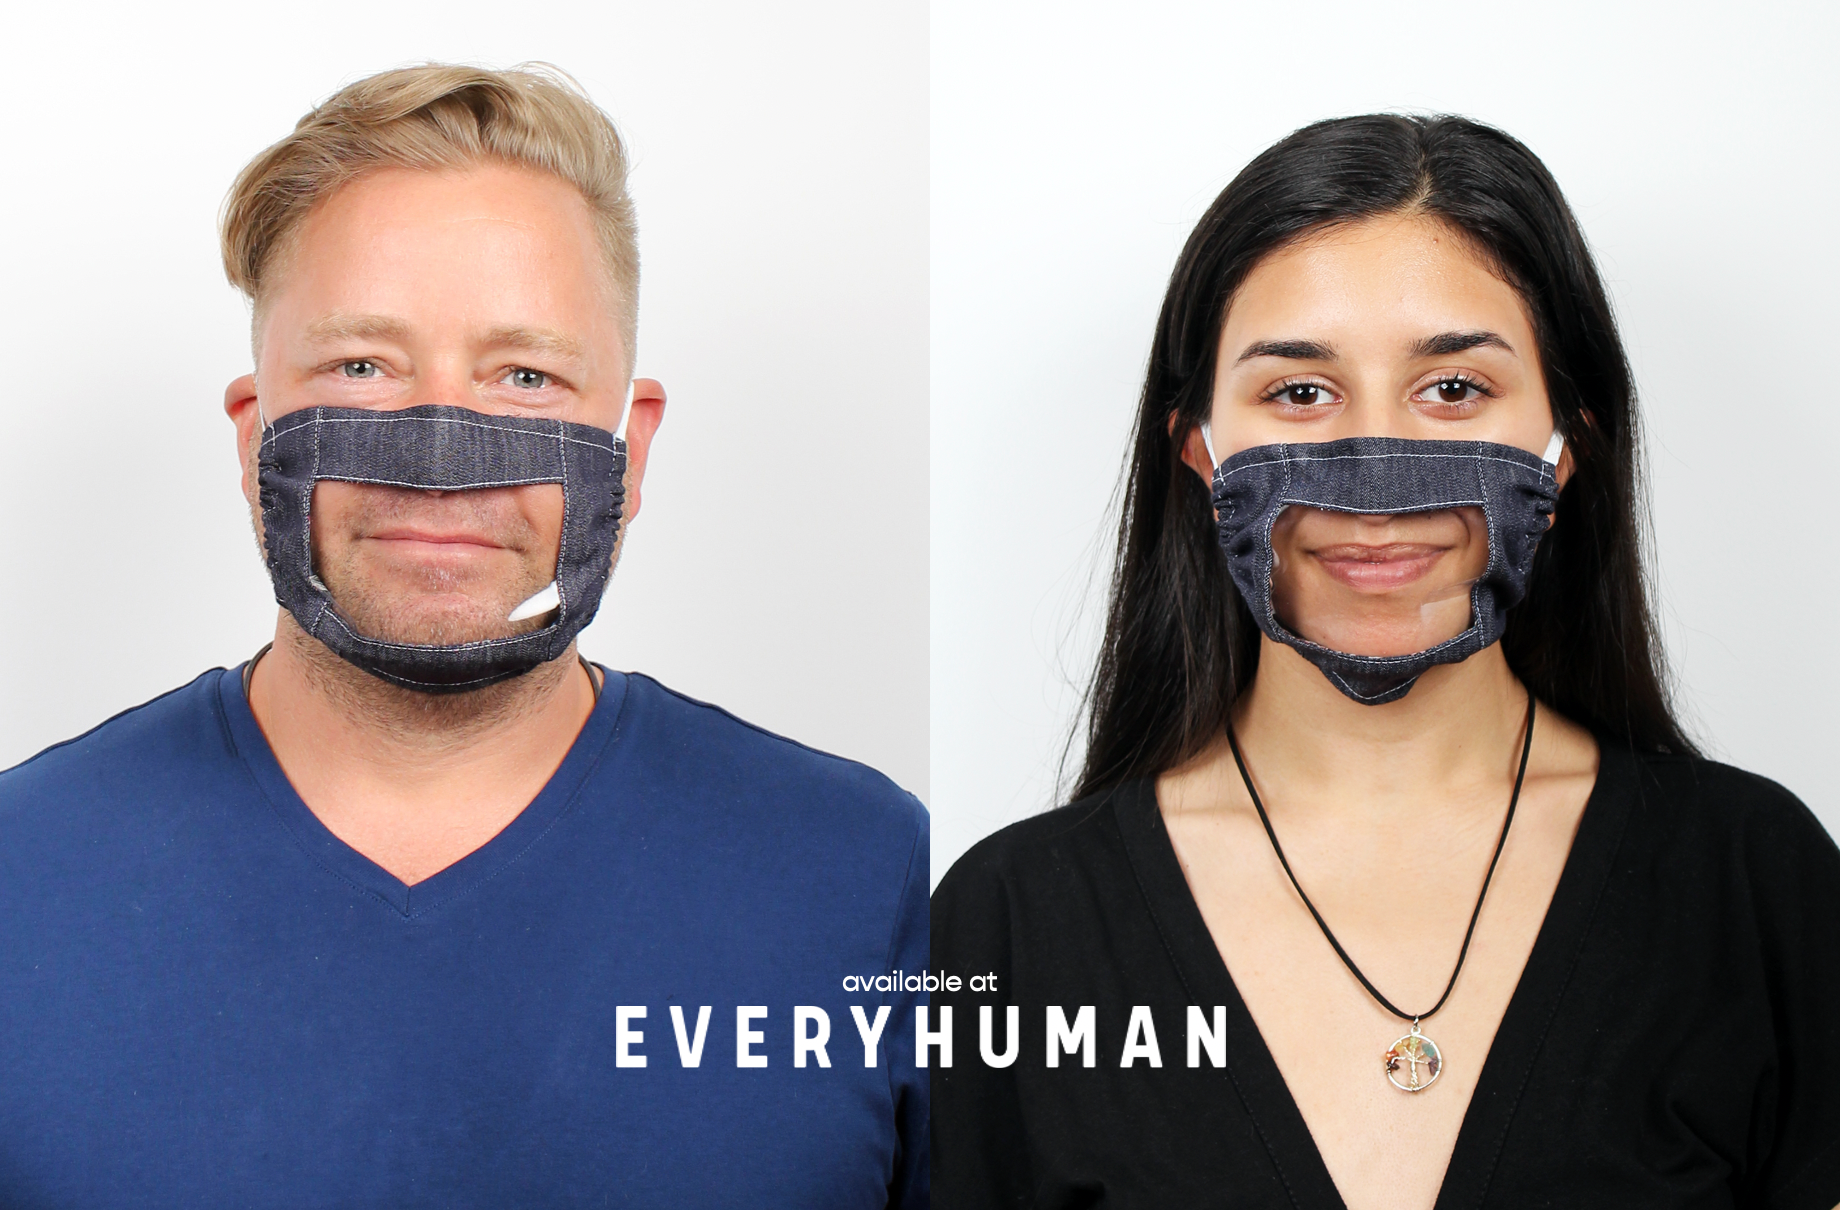 Behind the Mask: When & Why We Need to Wear a Face Mask